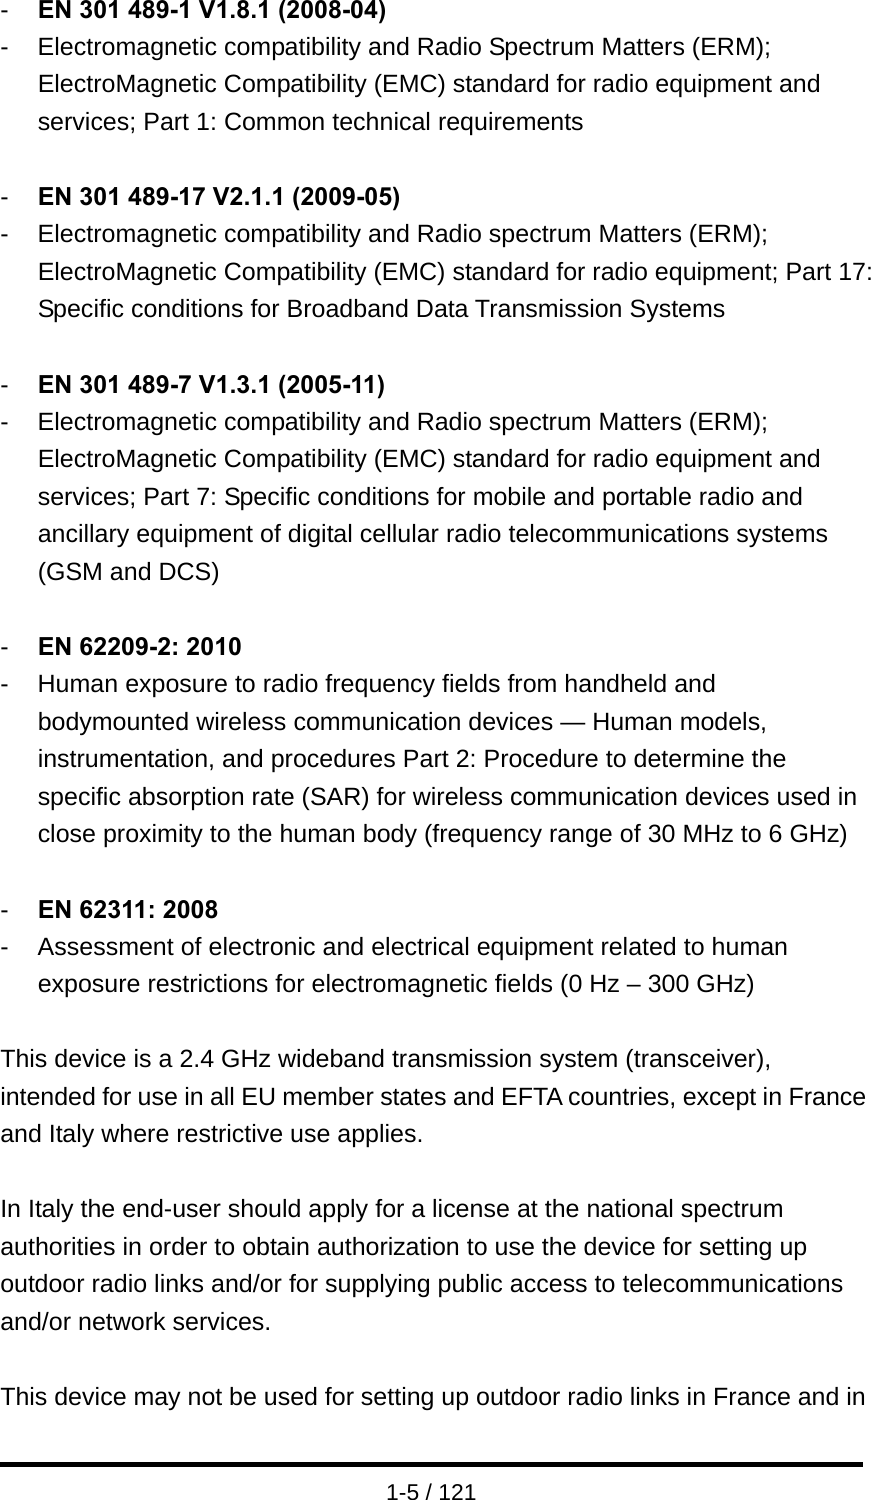  1-5 / 121 -  EN 301 489-1 V1.8.1 (2008-04) -  Electromagnetic compatibility and Radio Spectrum Matters (ERM); ElectroMagnetic Compatibility (EMC) standard for radio equipment and services; Part 1: Common technical requirements  -  EN 301 489-17 V2.1.1 (2009-05)   -  Electromagnetic compatibility and Radio spectrum Matters (ERM); ElectroMagnetic Compatibility (EMC) standard for radio equipment; Part 17: Specific conditions for Broadband Data Transmission Systems  -  EN 301 489-7 V1.3.1 (2005-11) -  Electromagnetic compatibility and Radio spectrum Matters (ERM); ElectroMagnetic Compatibility (EMC) standard for radio equipment and services; Part 7: Specific conditions for mobile and portable radio and ancillary equipment of digital cellular radio telecommunications systems (GSM and DCS)  -  EN 62209-2: 2010 -  Human exposure to radio frequency fields from handheld and bodymounted wireless communication devices — Human models, instrumentation, and procedures Part 2: Procedure to determine the specific absorption rate (SAR) for wireless communication devices used in close proximity to the human body (frequency range of 30 MHz to 6 GHz)  -  EN 62311: 2008 -  Assessment of electronic and electrical equipment related to human exposure restrictions for electromagnetic fields (0 Hz – 300 GHz)  This device is a 2.4 GHz wideband transmission system (transceiver), intended for use in all EU member states and EFTA countries, except in France and Italy where restrictive use applies.  In Italy the end-user should apply for a license at the national spectrum authorities in order to obtain authorization to use the device for setting up outdoor radio links and/or for supplying public access to telecommunications and/or network services.  This device may not be used for setting up outdoor radio links in France and in 